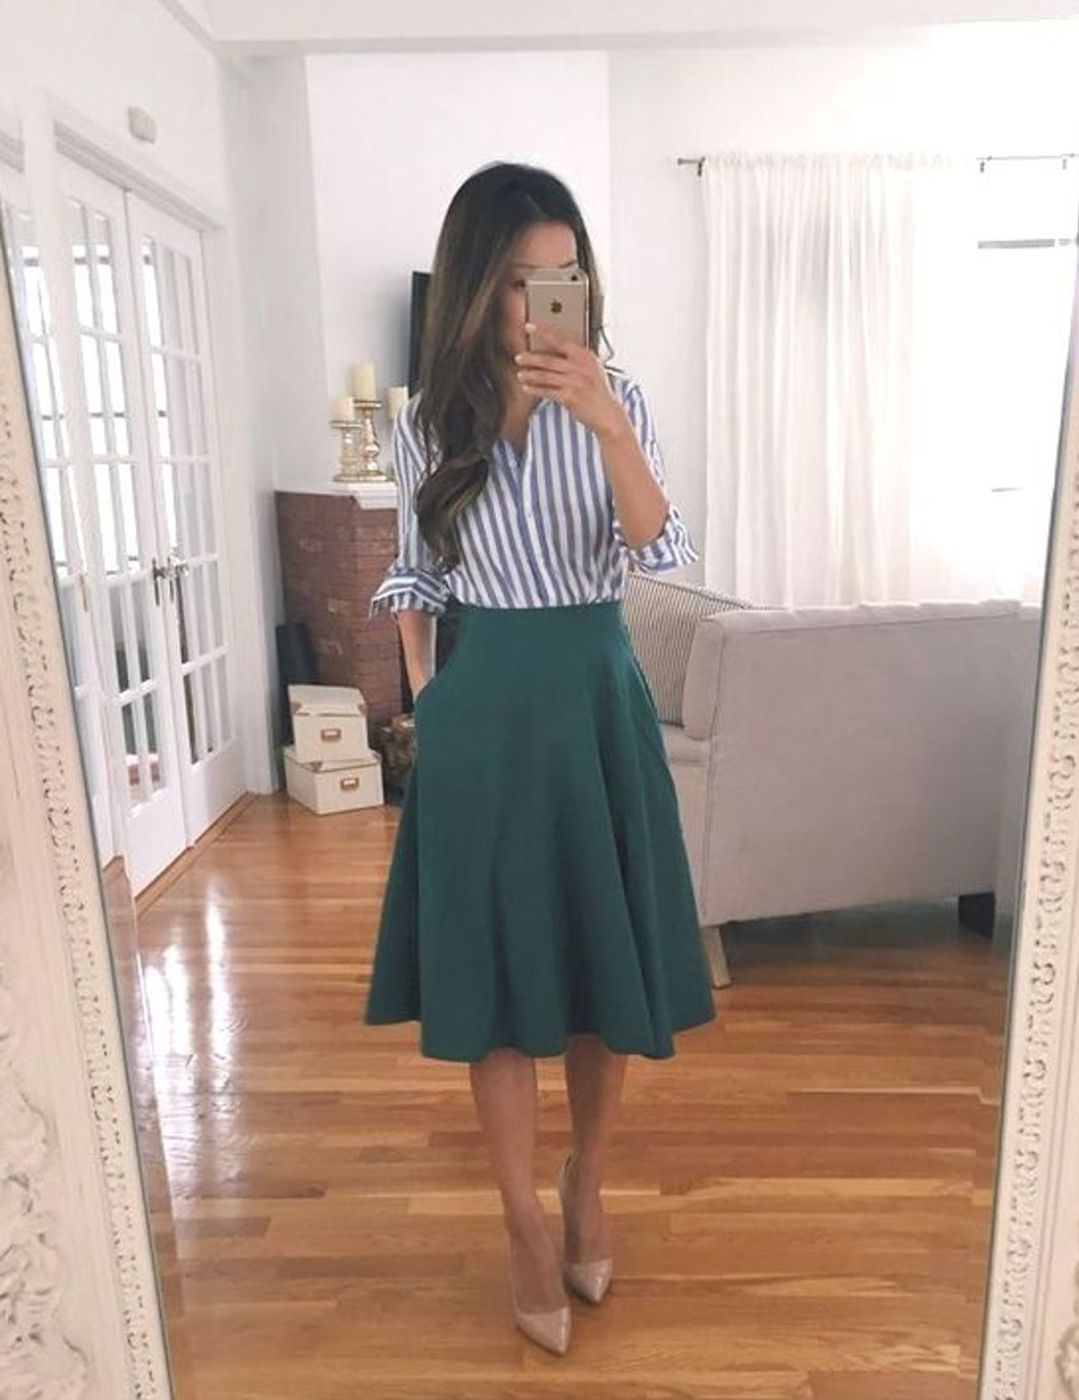 Flared skirt and striped shirt teacher outfit